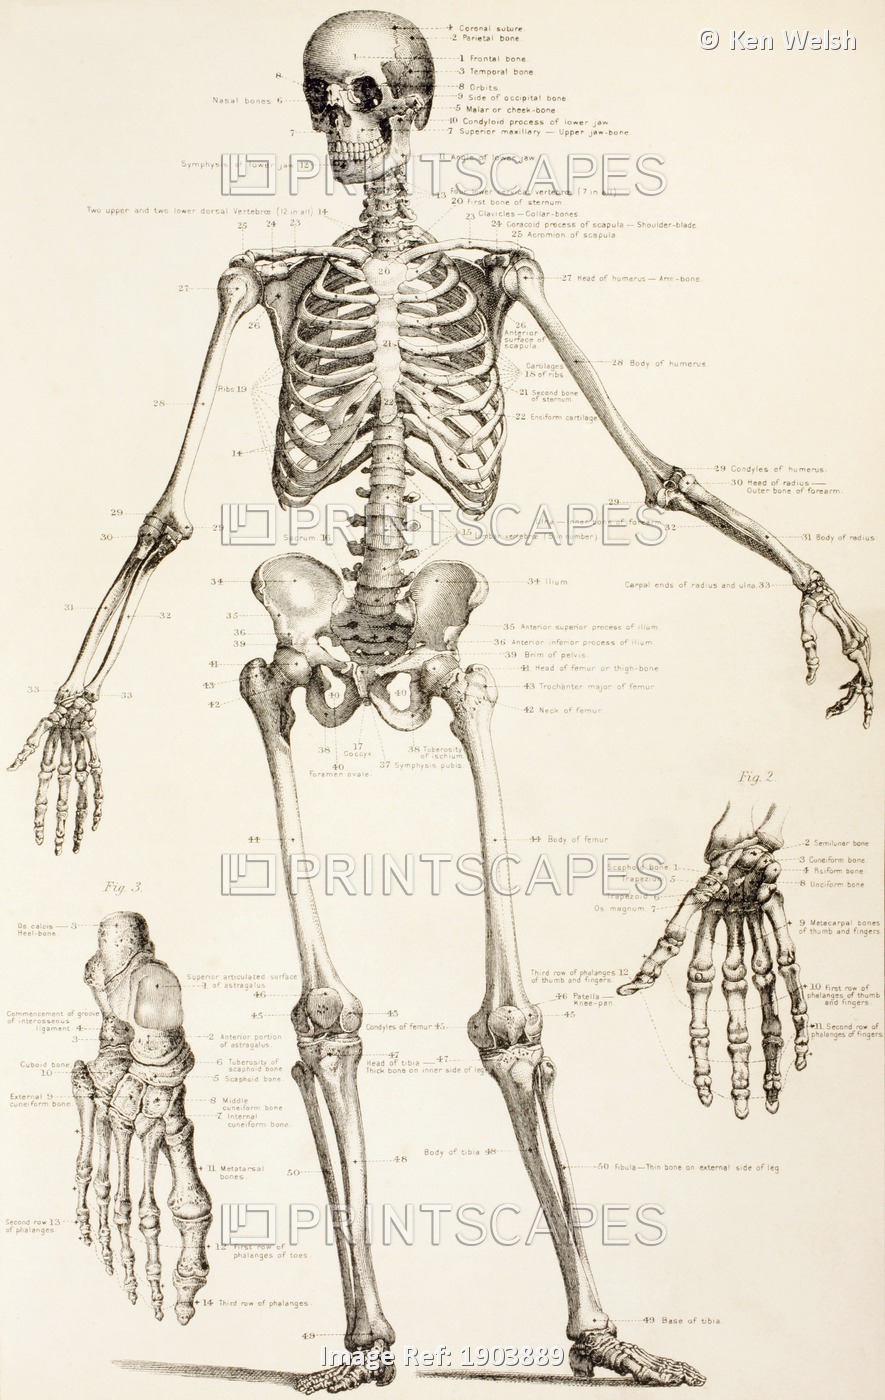 The Human Skeleton. From The Household Physician, Published Circa 1890.